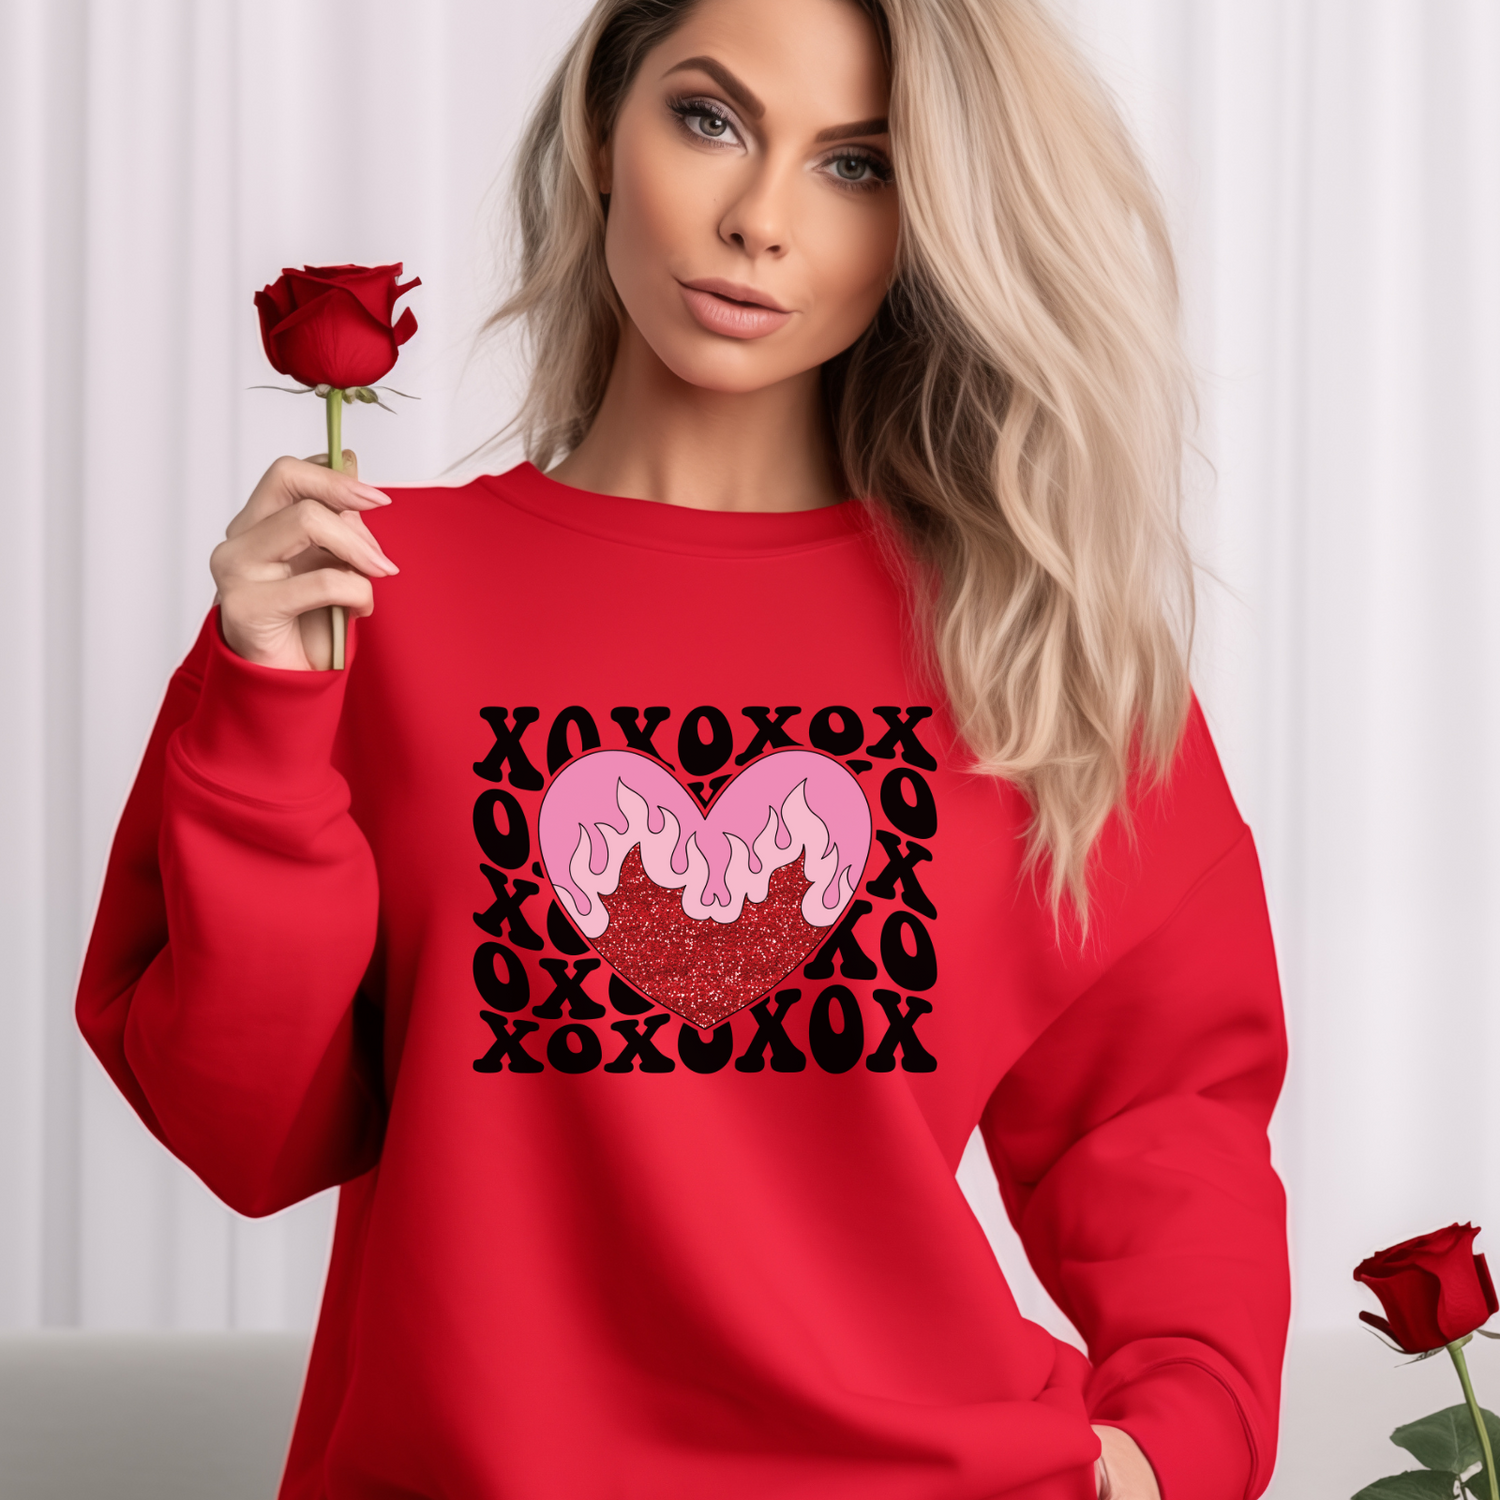 Enchanting Valentines Sweaters - Cozy Charm For The Holiday